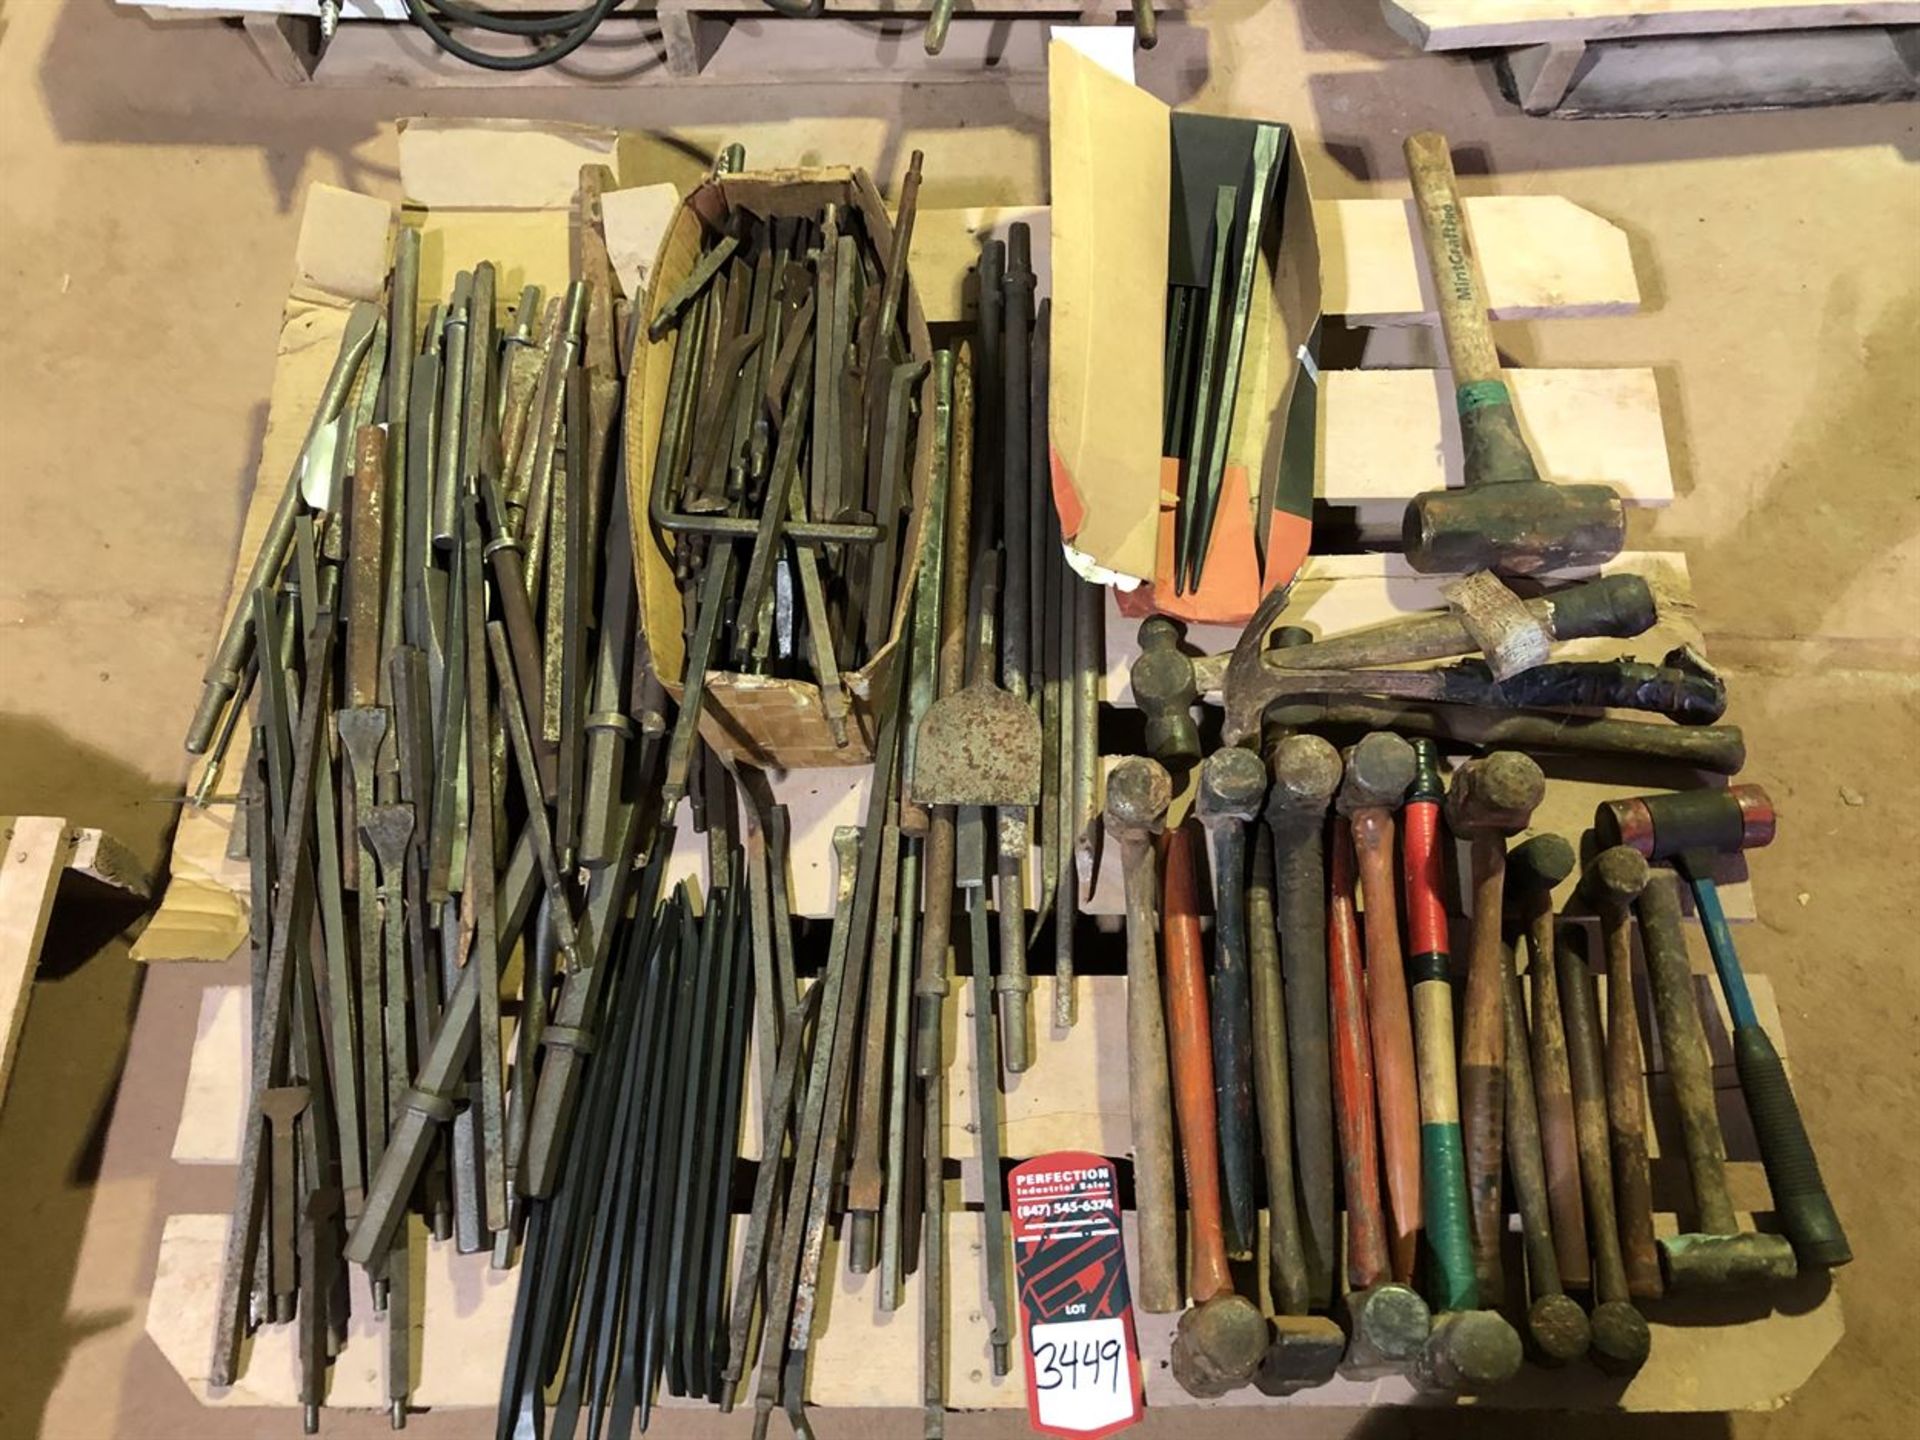 Lot of Assorted Tools, Including Prybars and Hammers (Location: A1 Maintenance)